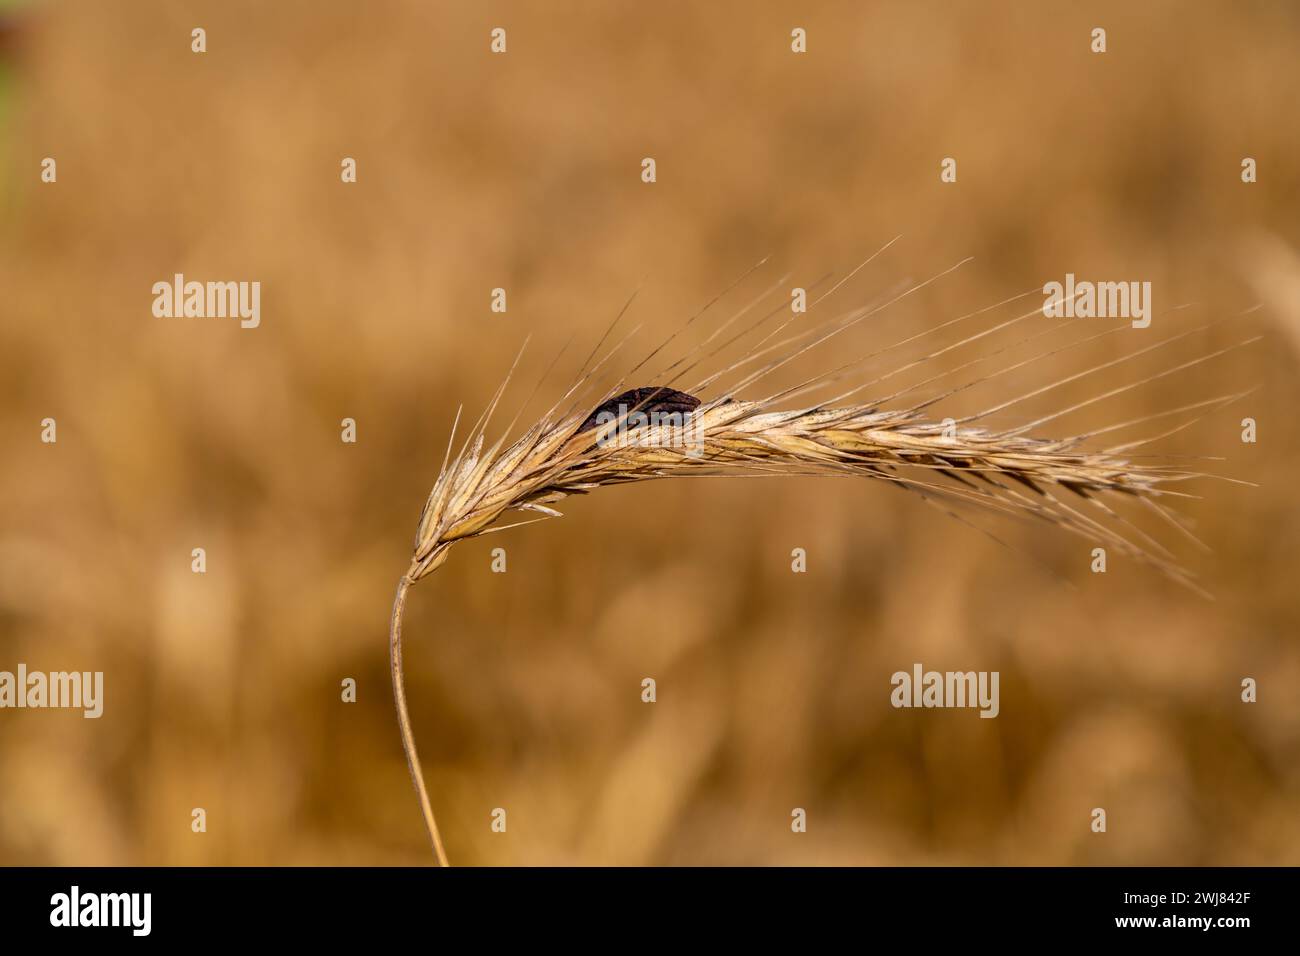 Rye with ergot fungus in the field Stock Photo